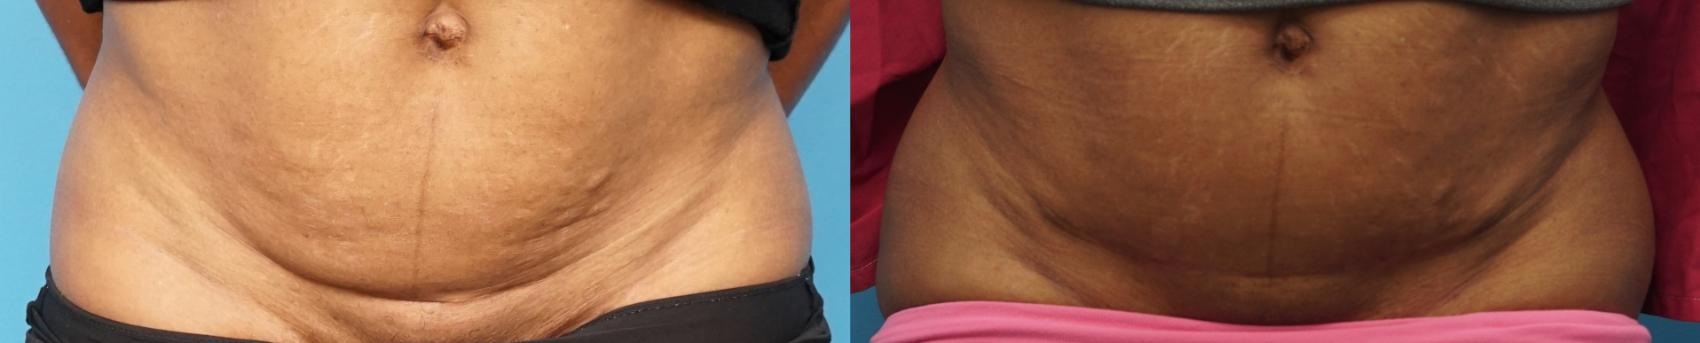 Before & After Abdominoplasty/Tummy Tuck Case 327 Front View in North Shore, IL